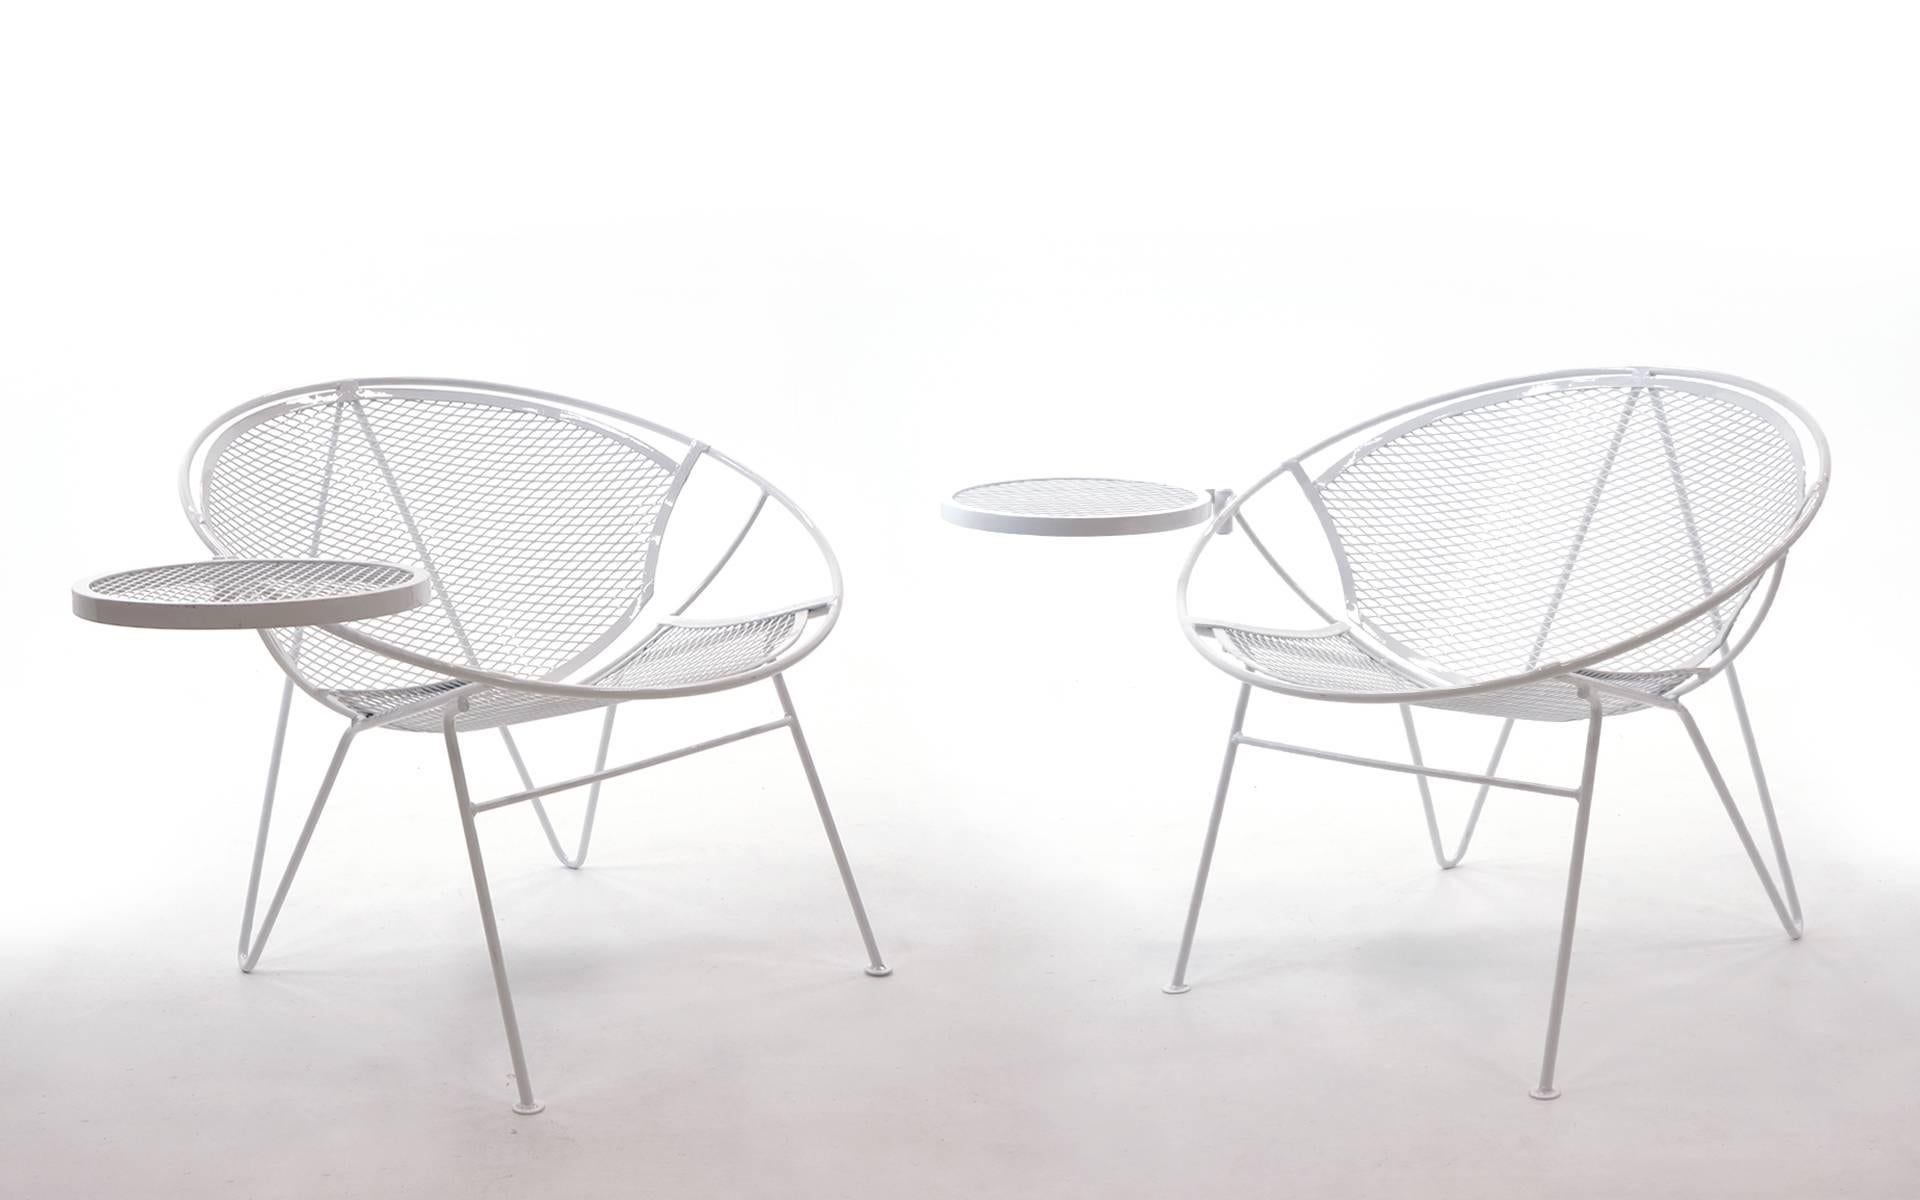 We have ten of these sets. A set consists of a chair, detachable footrest, and side table. This design is the best combination of style and comfort in outdoor seating. Very rare hairpin leg version of the the Maurizio Tempistini design John